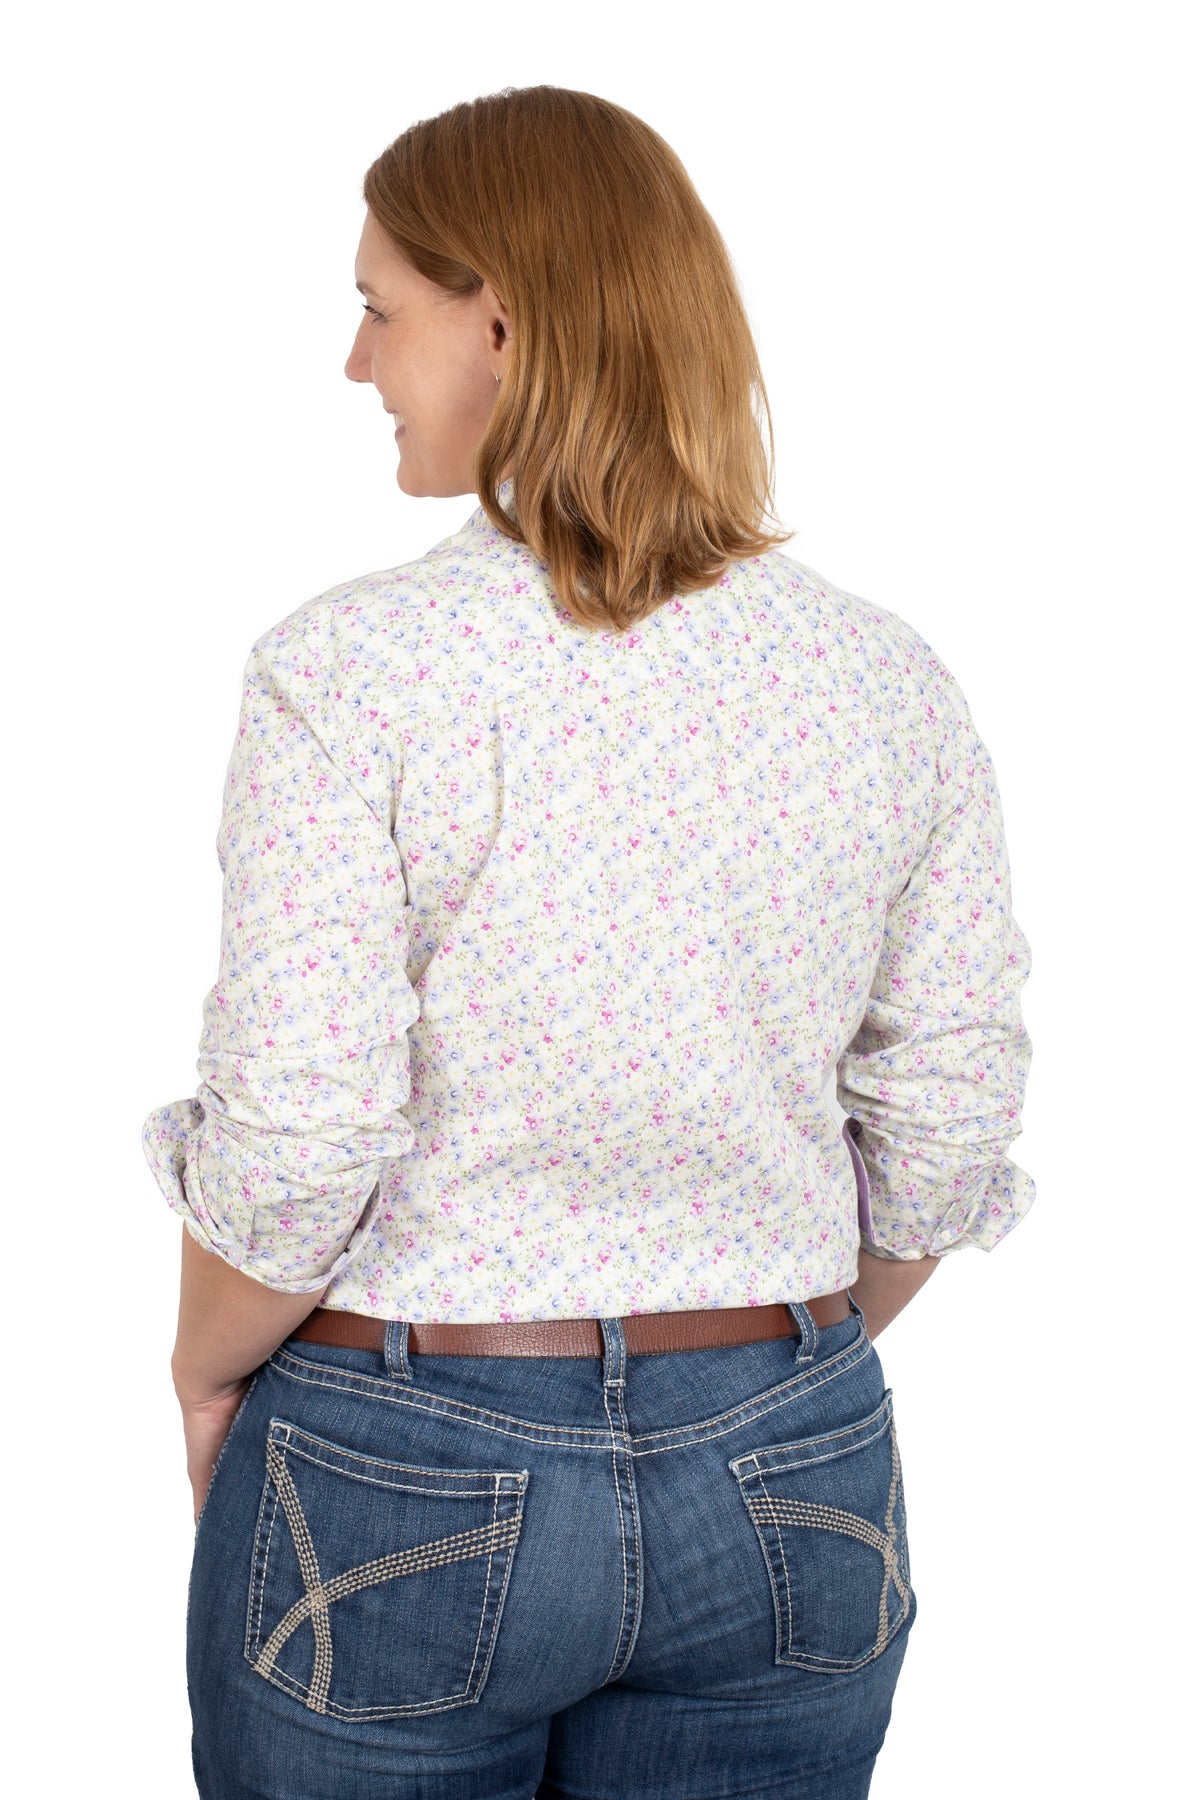 Just Country Womens Abbey Full Button Shirt - Cream Orchids